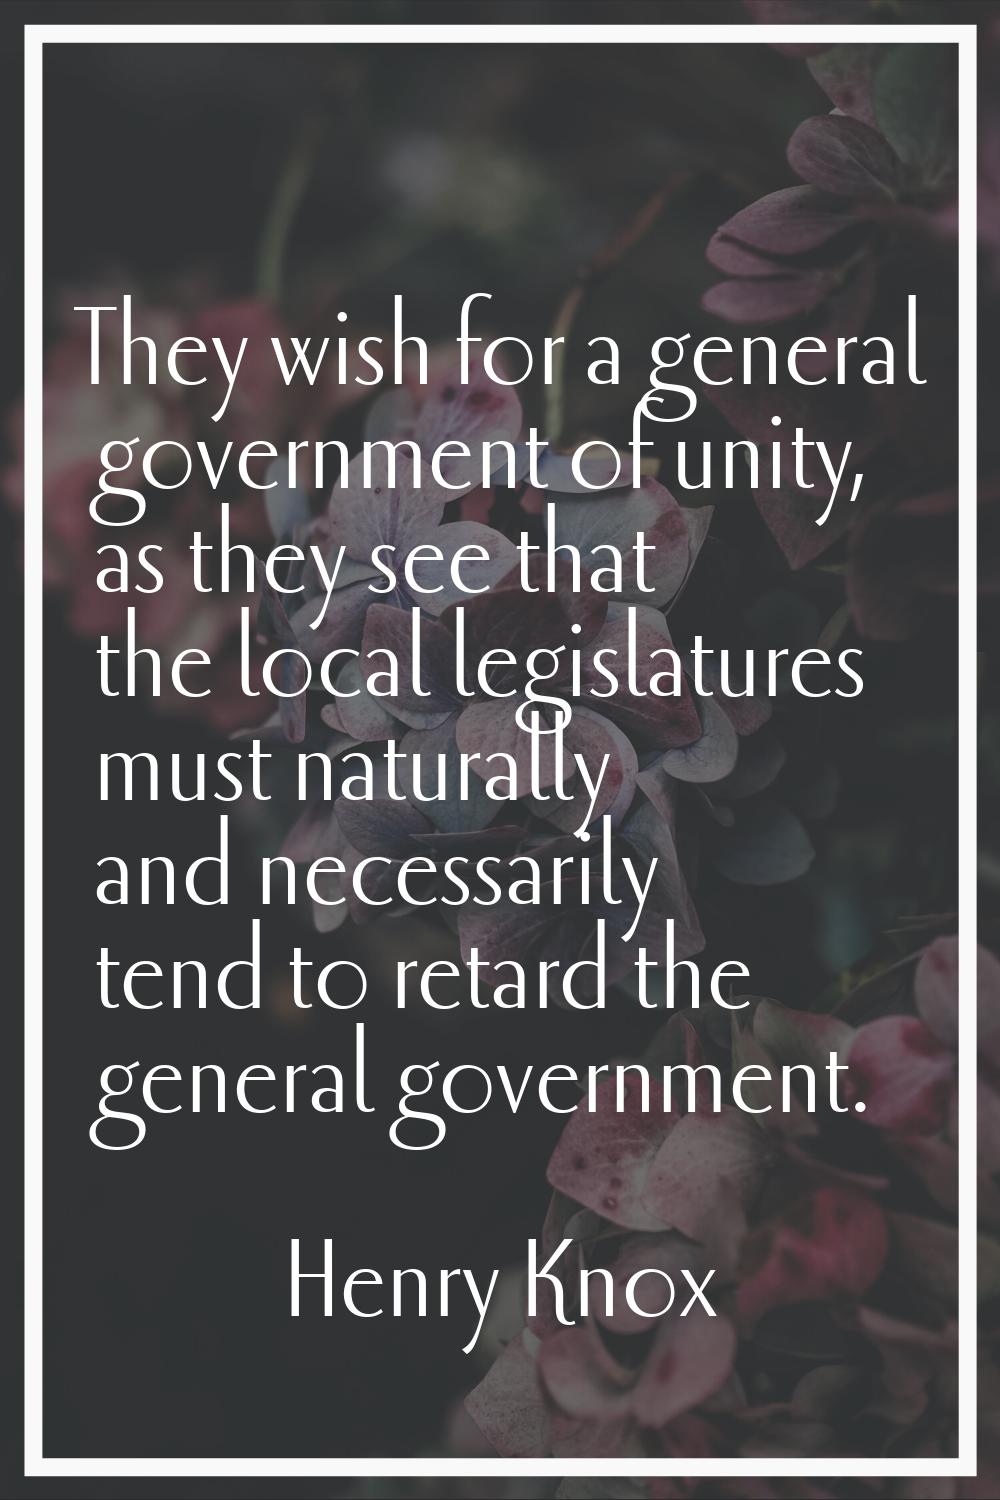 They wish for a general government of unity, as they see that the local legislatures must naturally